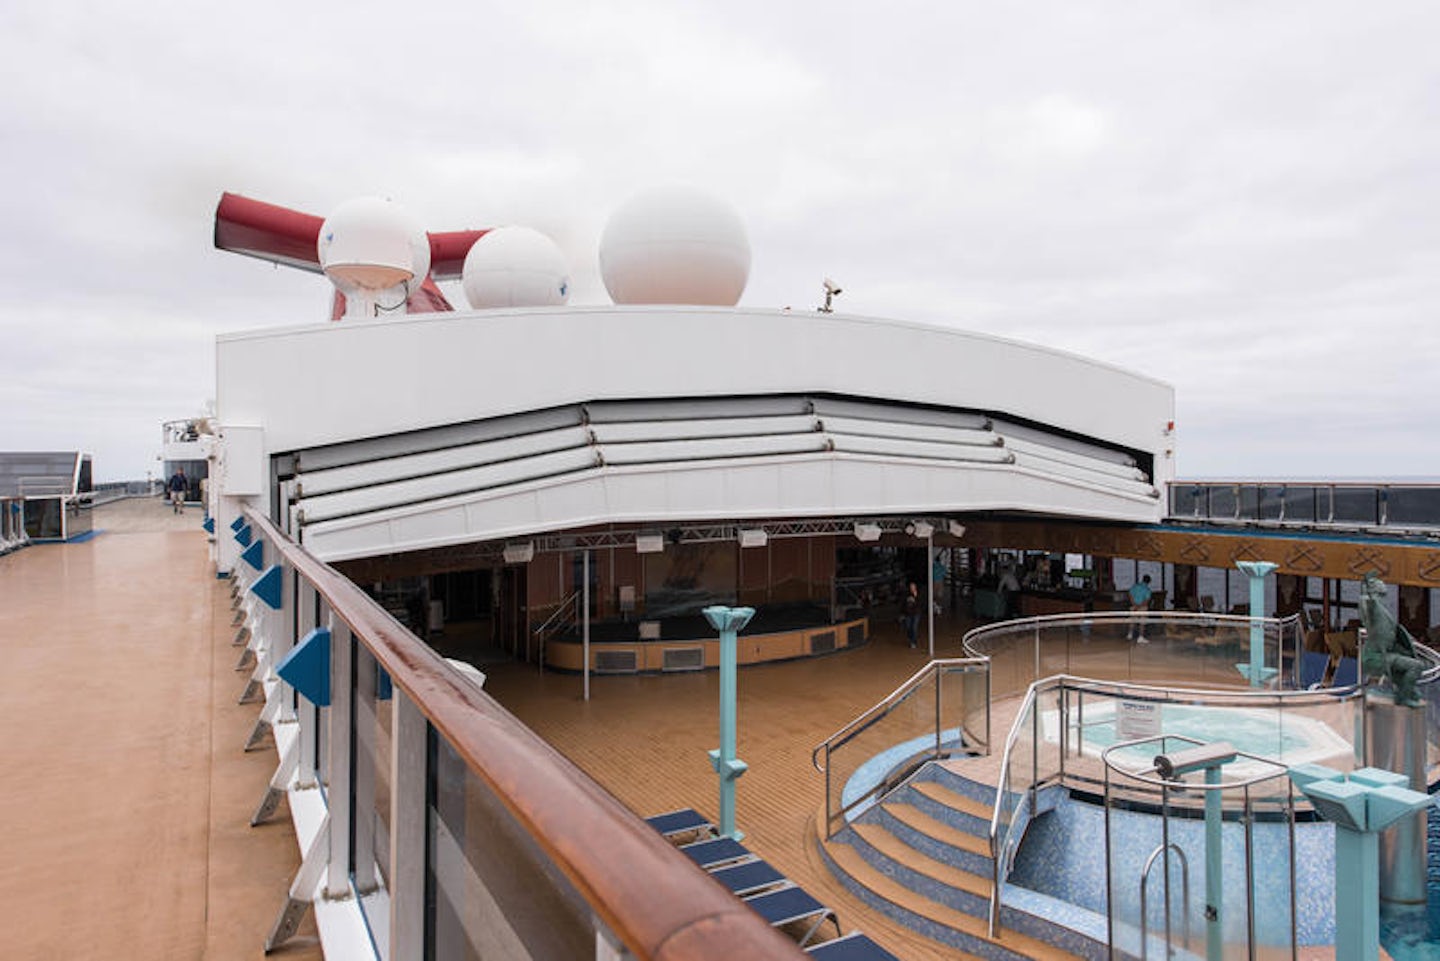 Sliding Sky Dome on Carnival Miracle